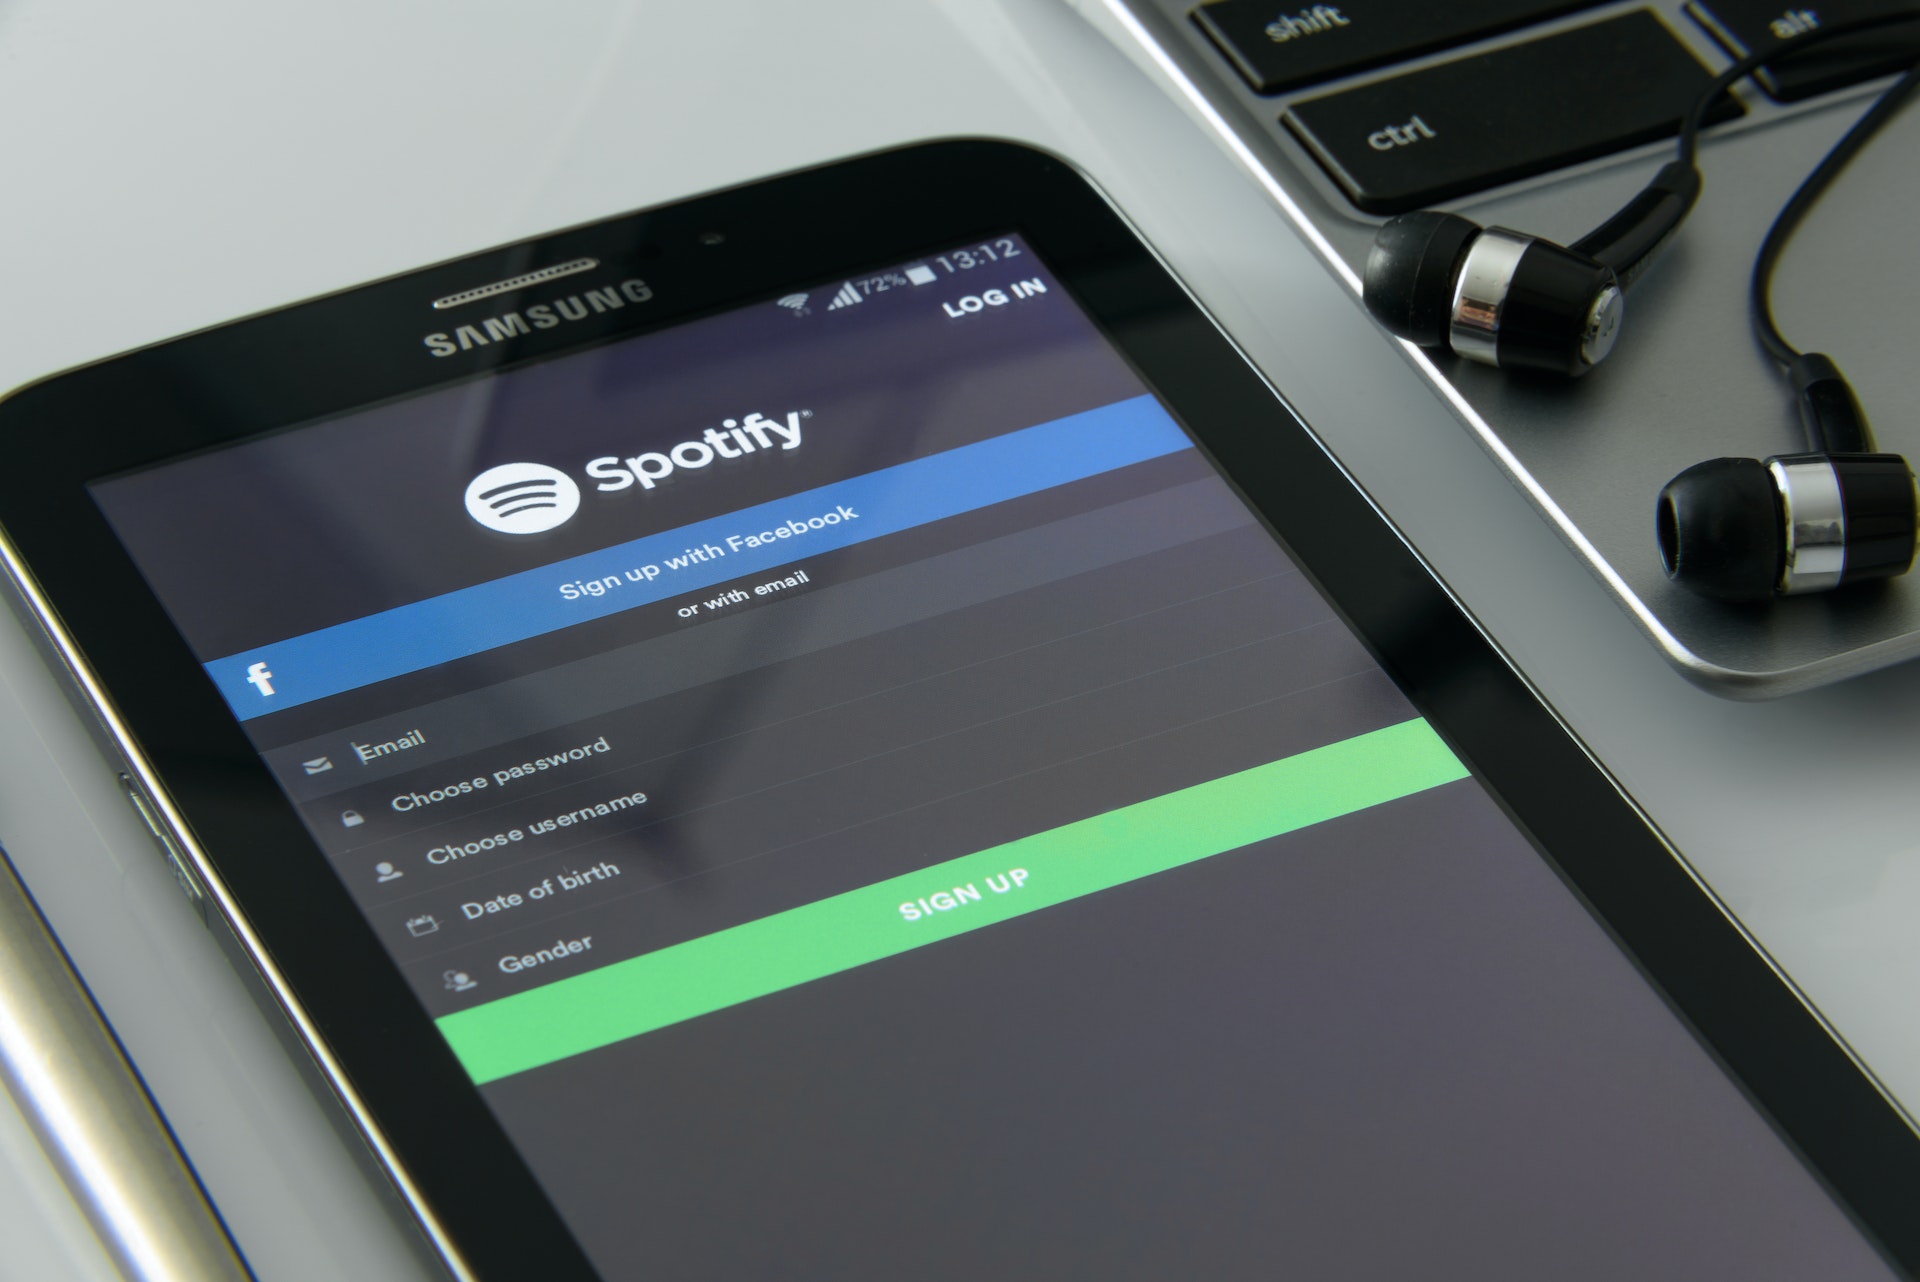 How Can I Download Spotify Songs For Free Without Premium? Download Spotify Songs For Free Without Premium. Download Spotify Songs for Free. Download Spotify Songs